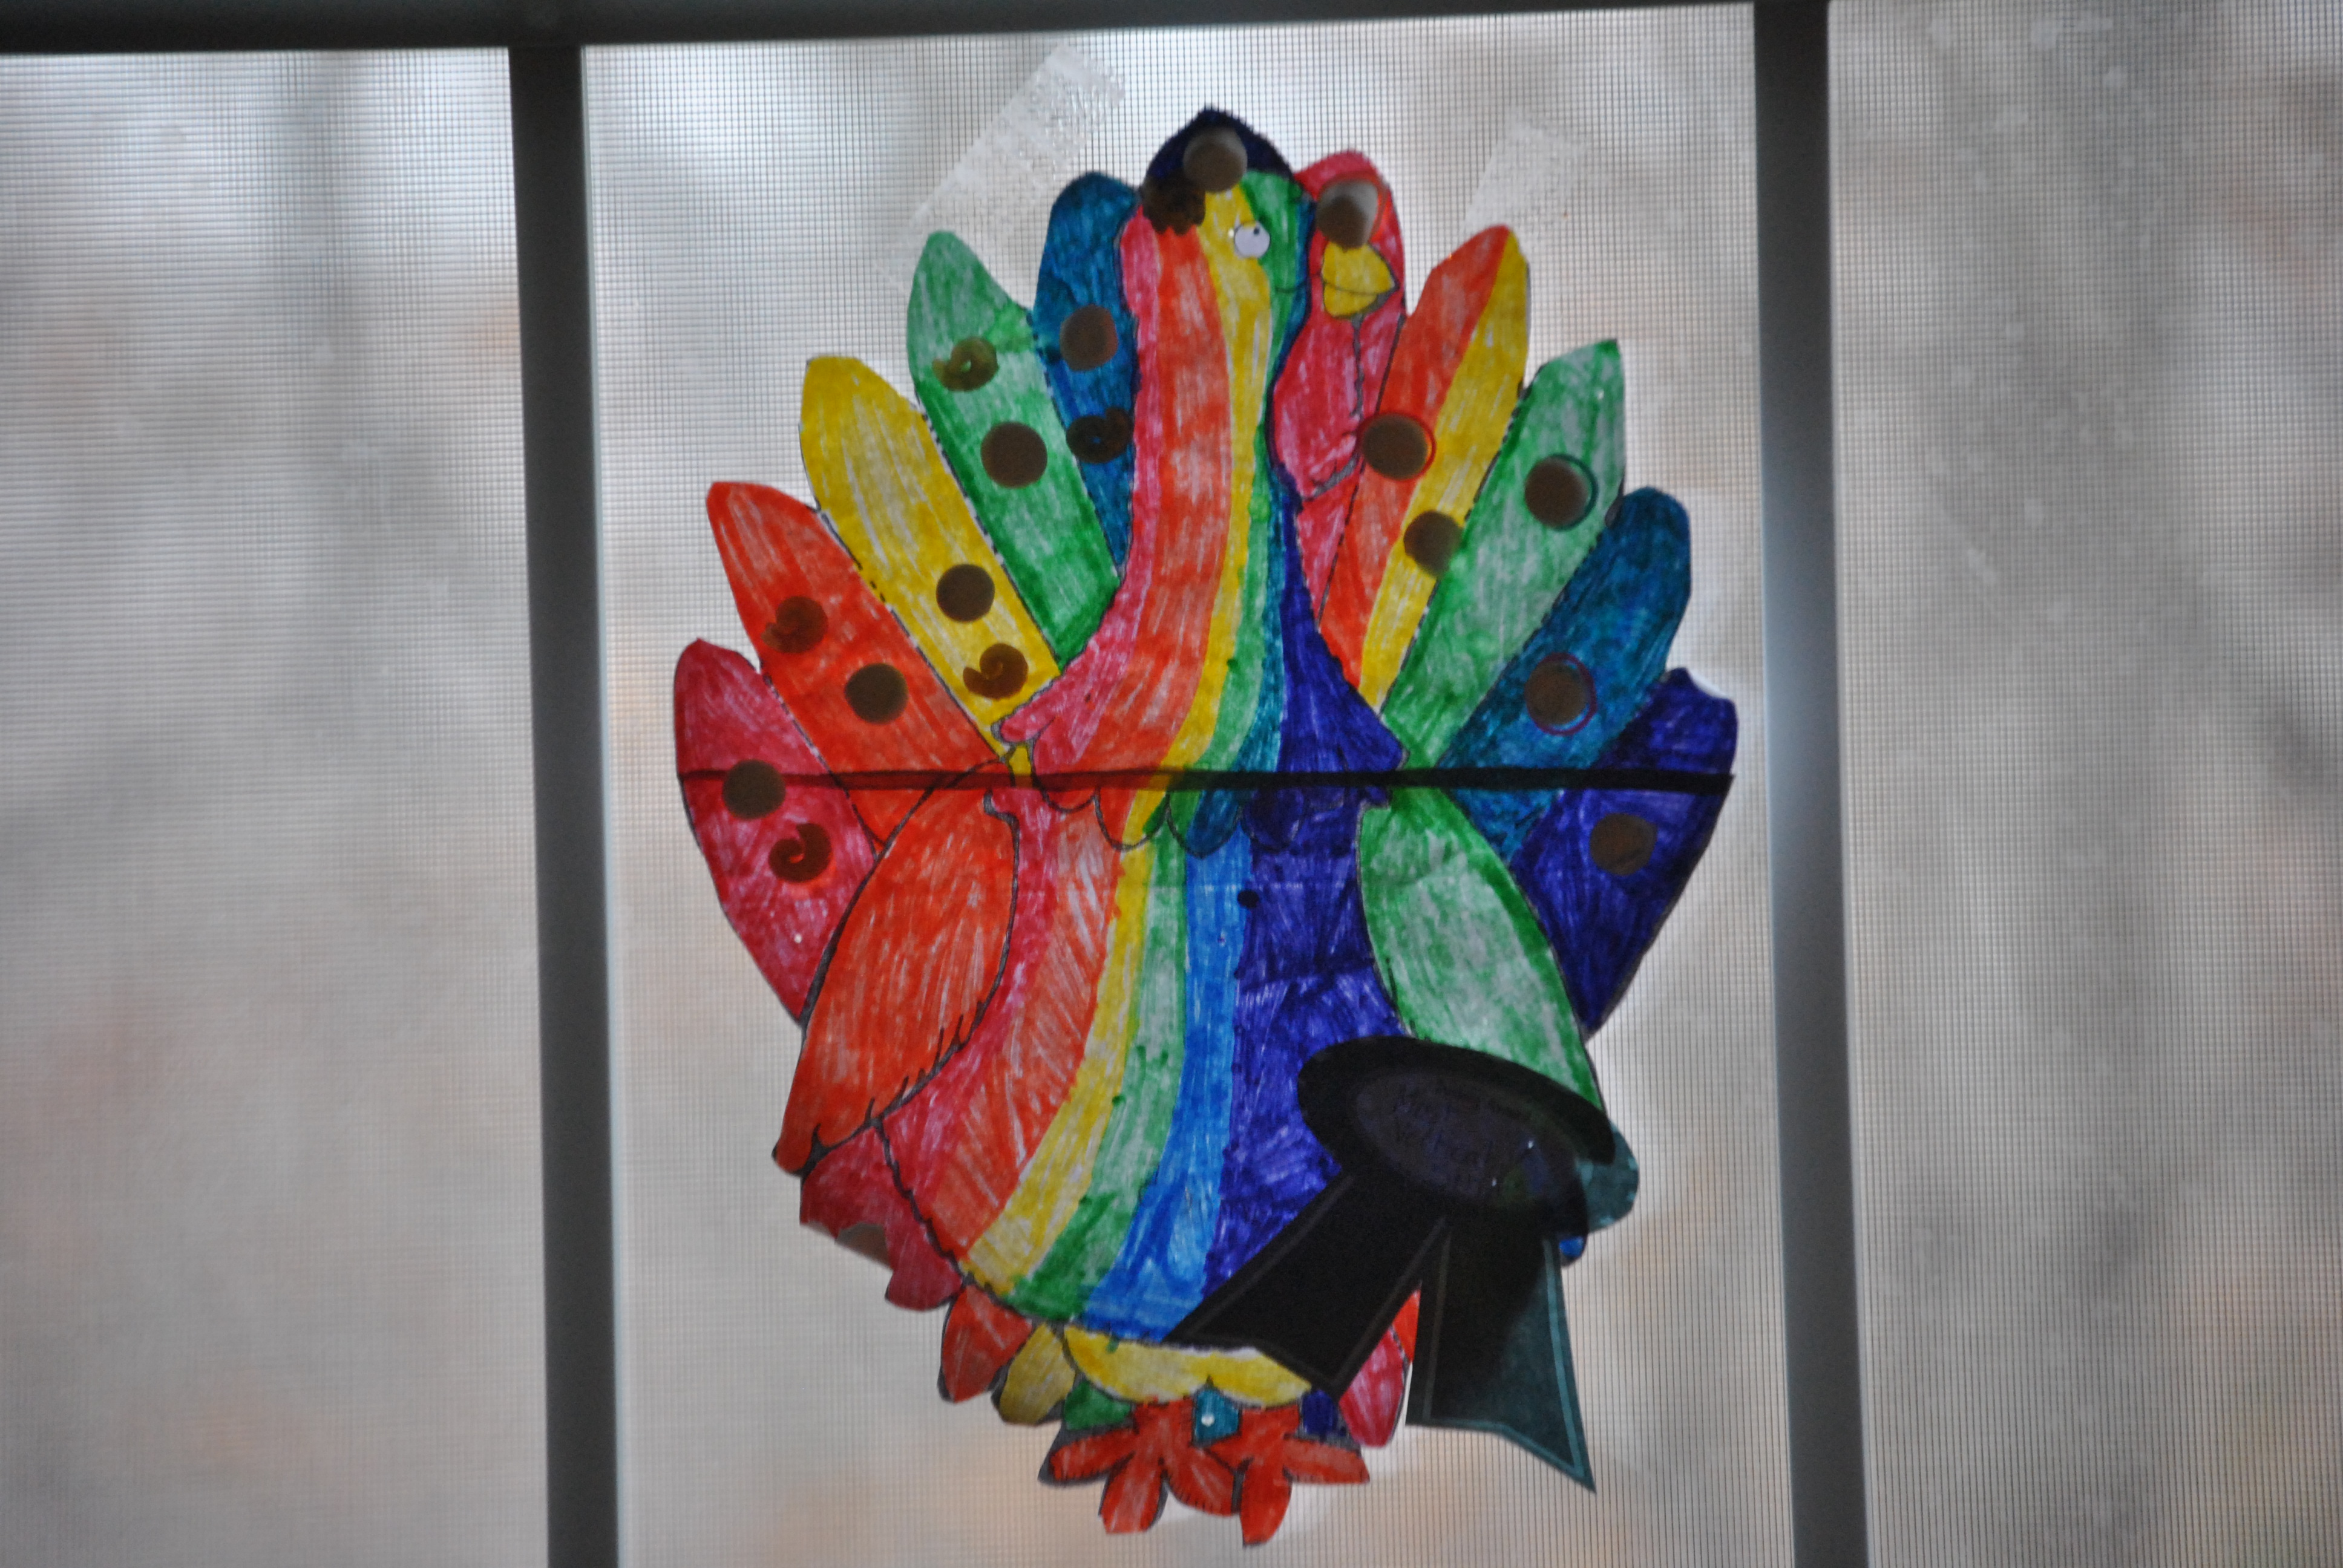 How can I decorate a paper turkey?